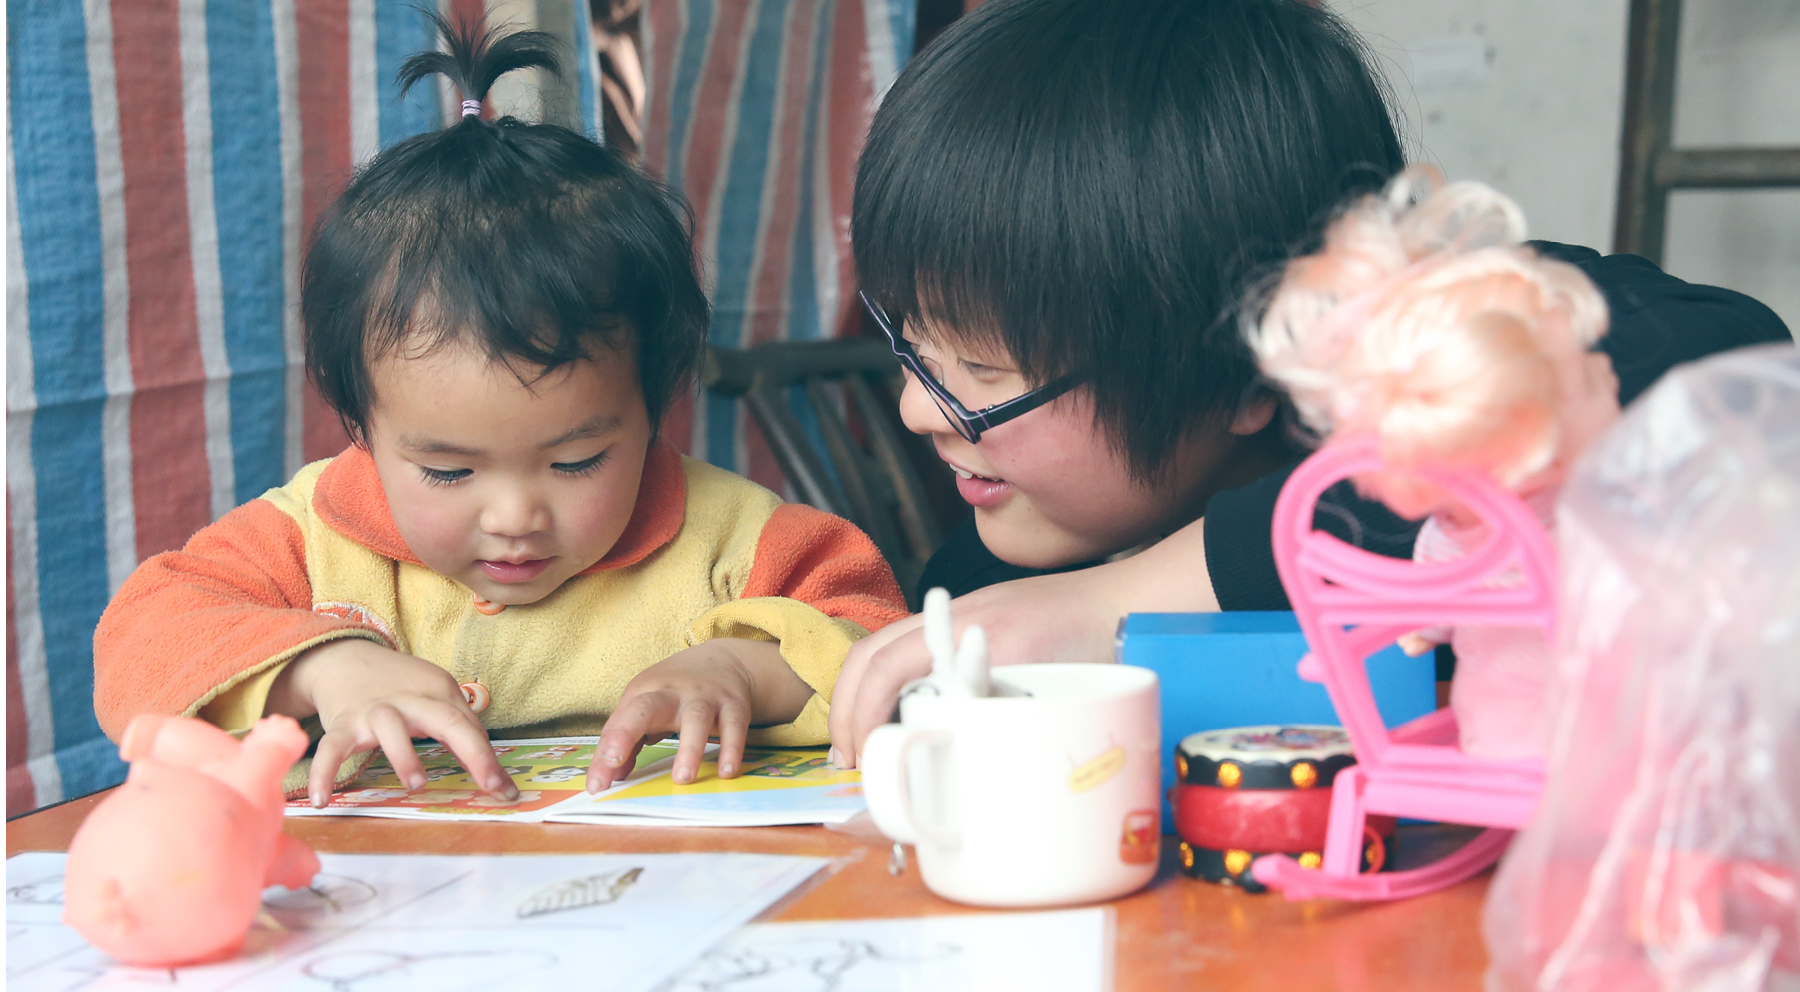 A young child and an adult both with black hair sit at a table, surrounded by childrens toys and reading from a piece of paper together 